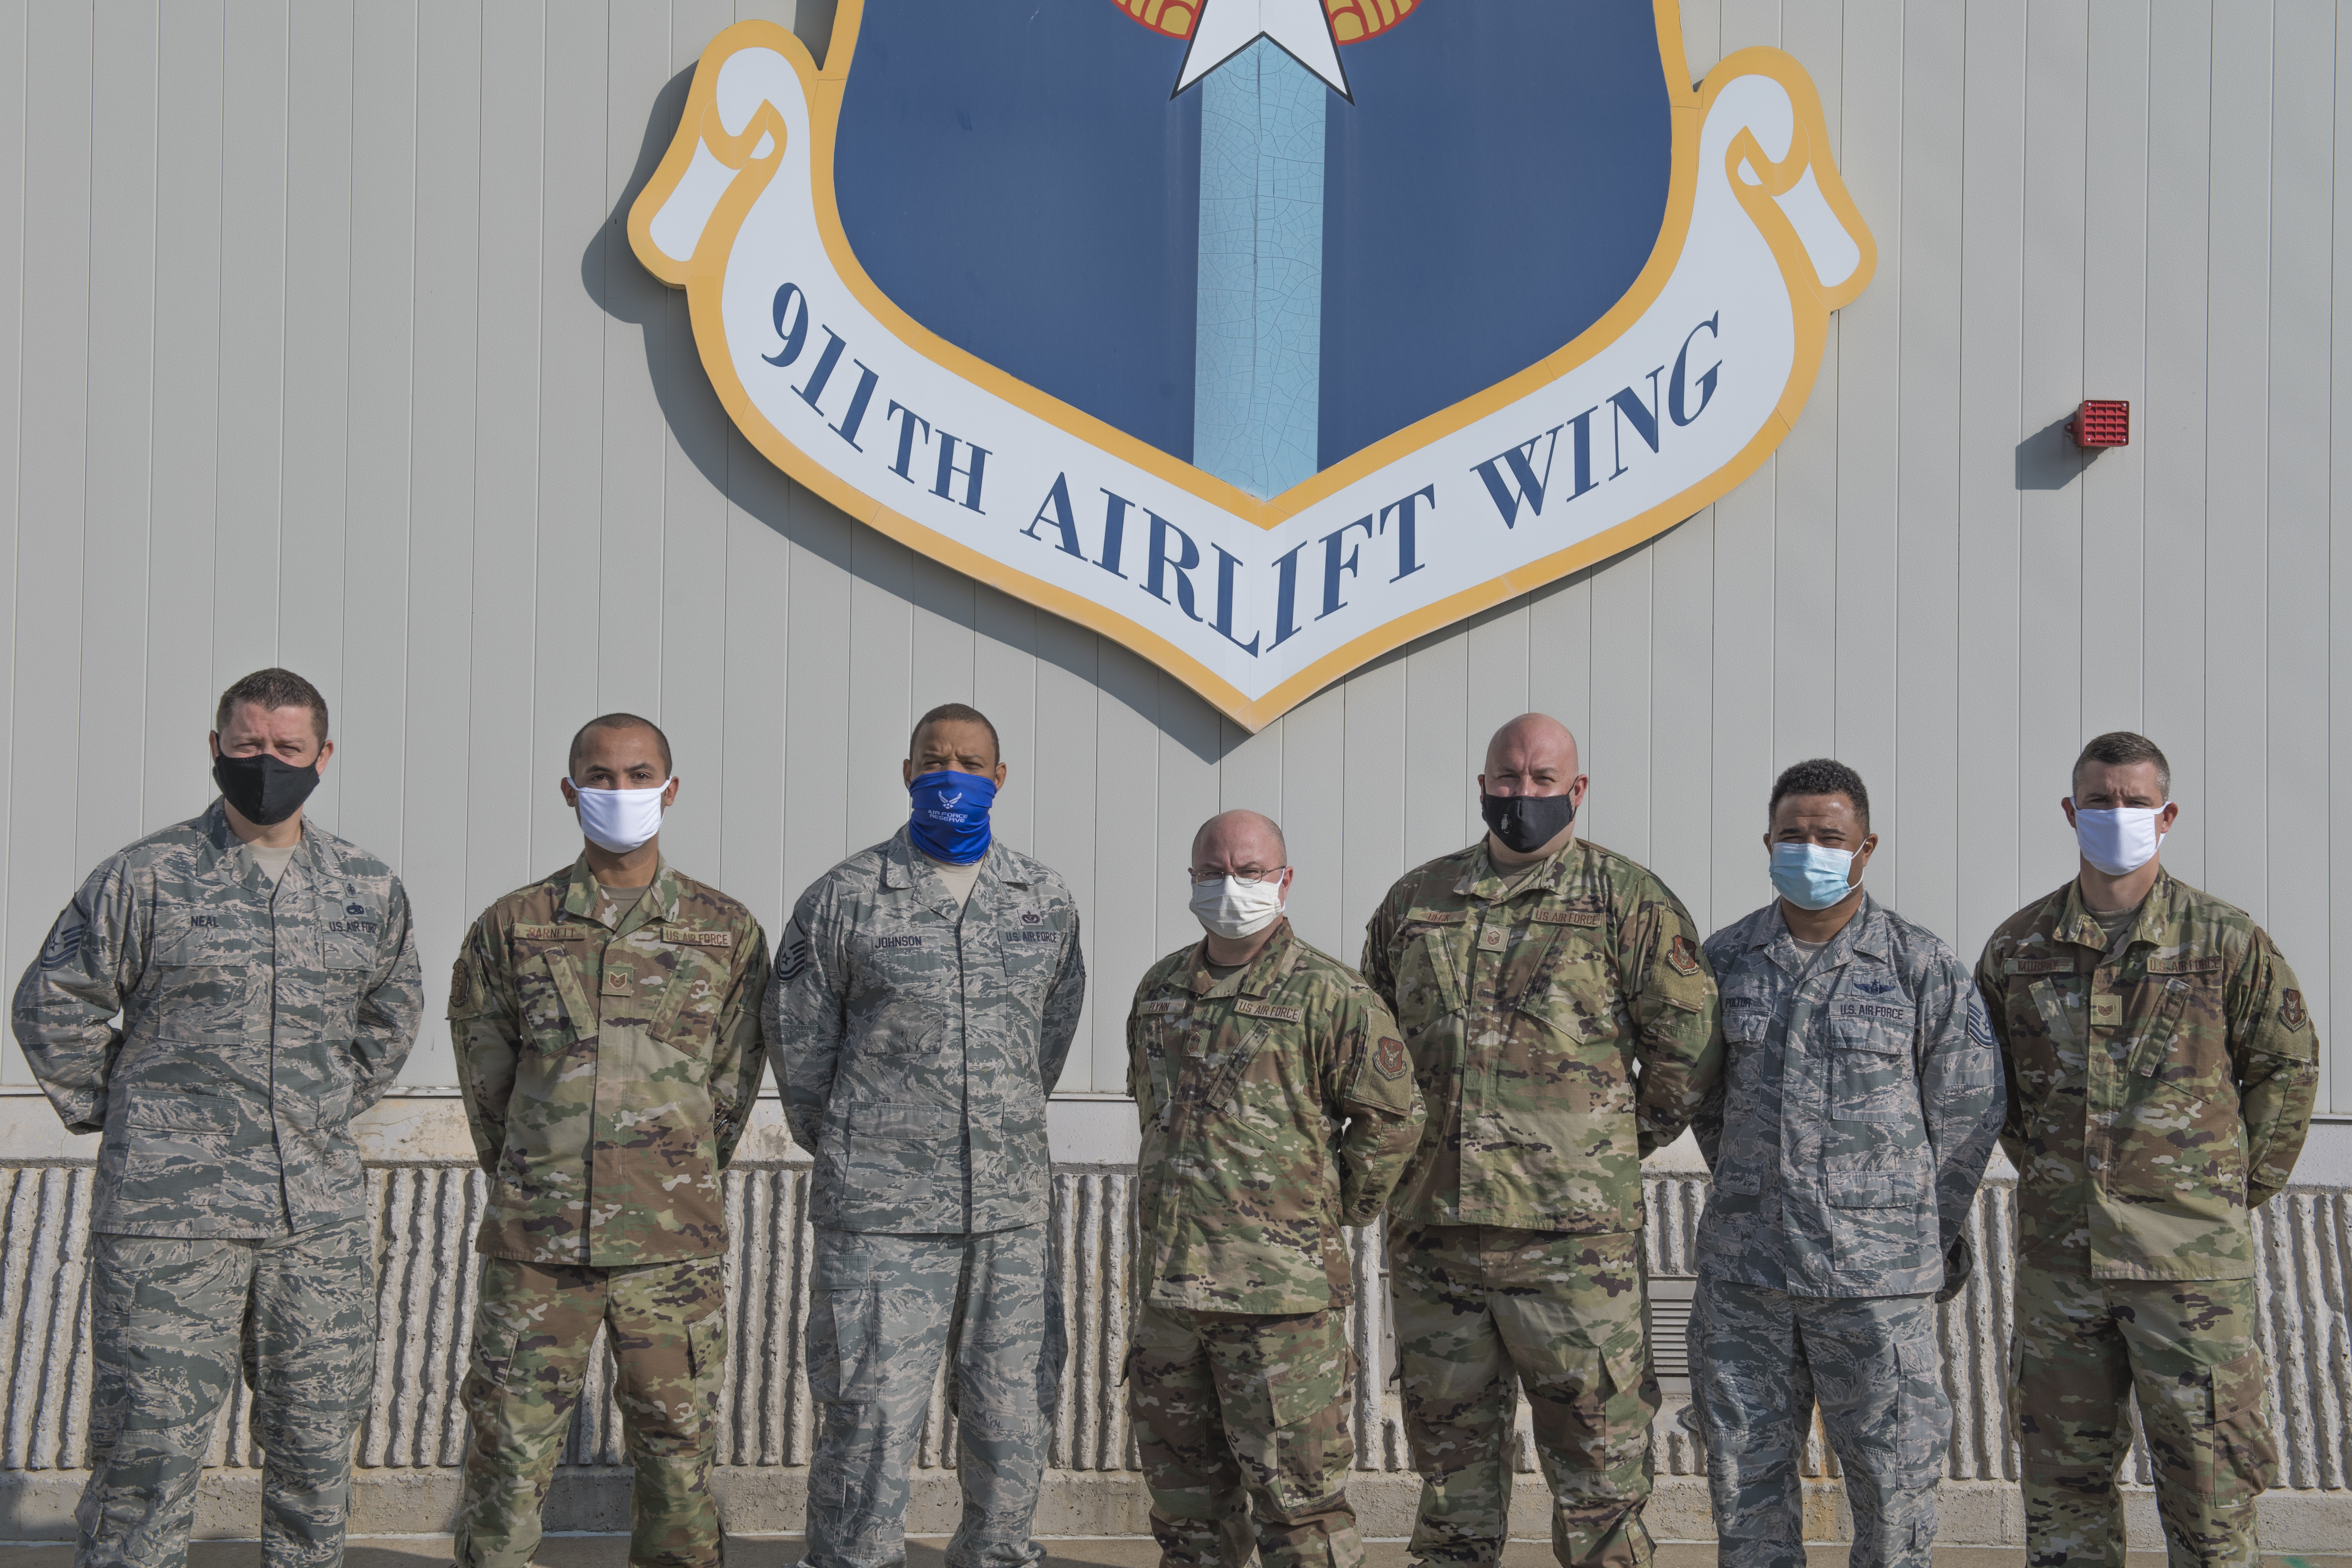 Same Air Force, new recruiting > Pittsburgh Air Reserve Station